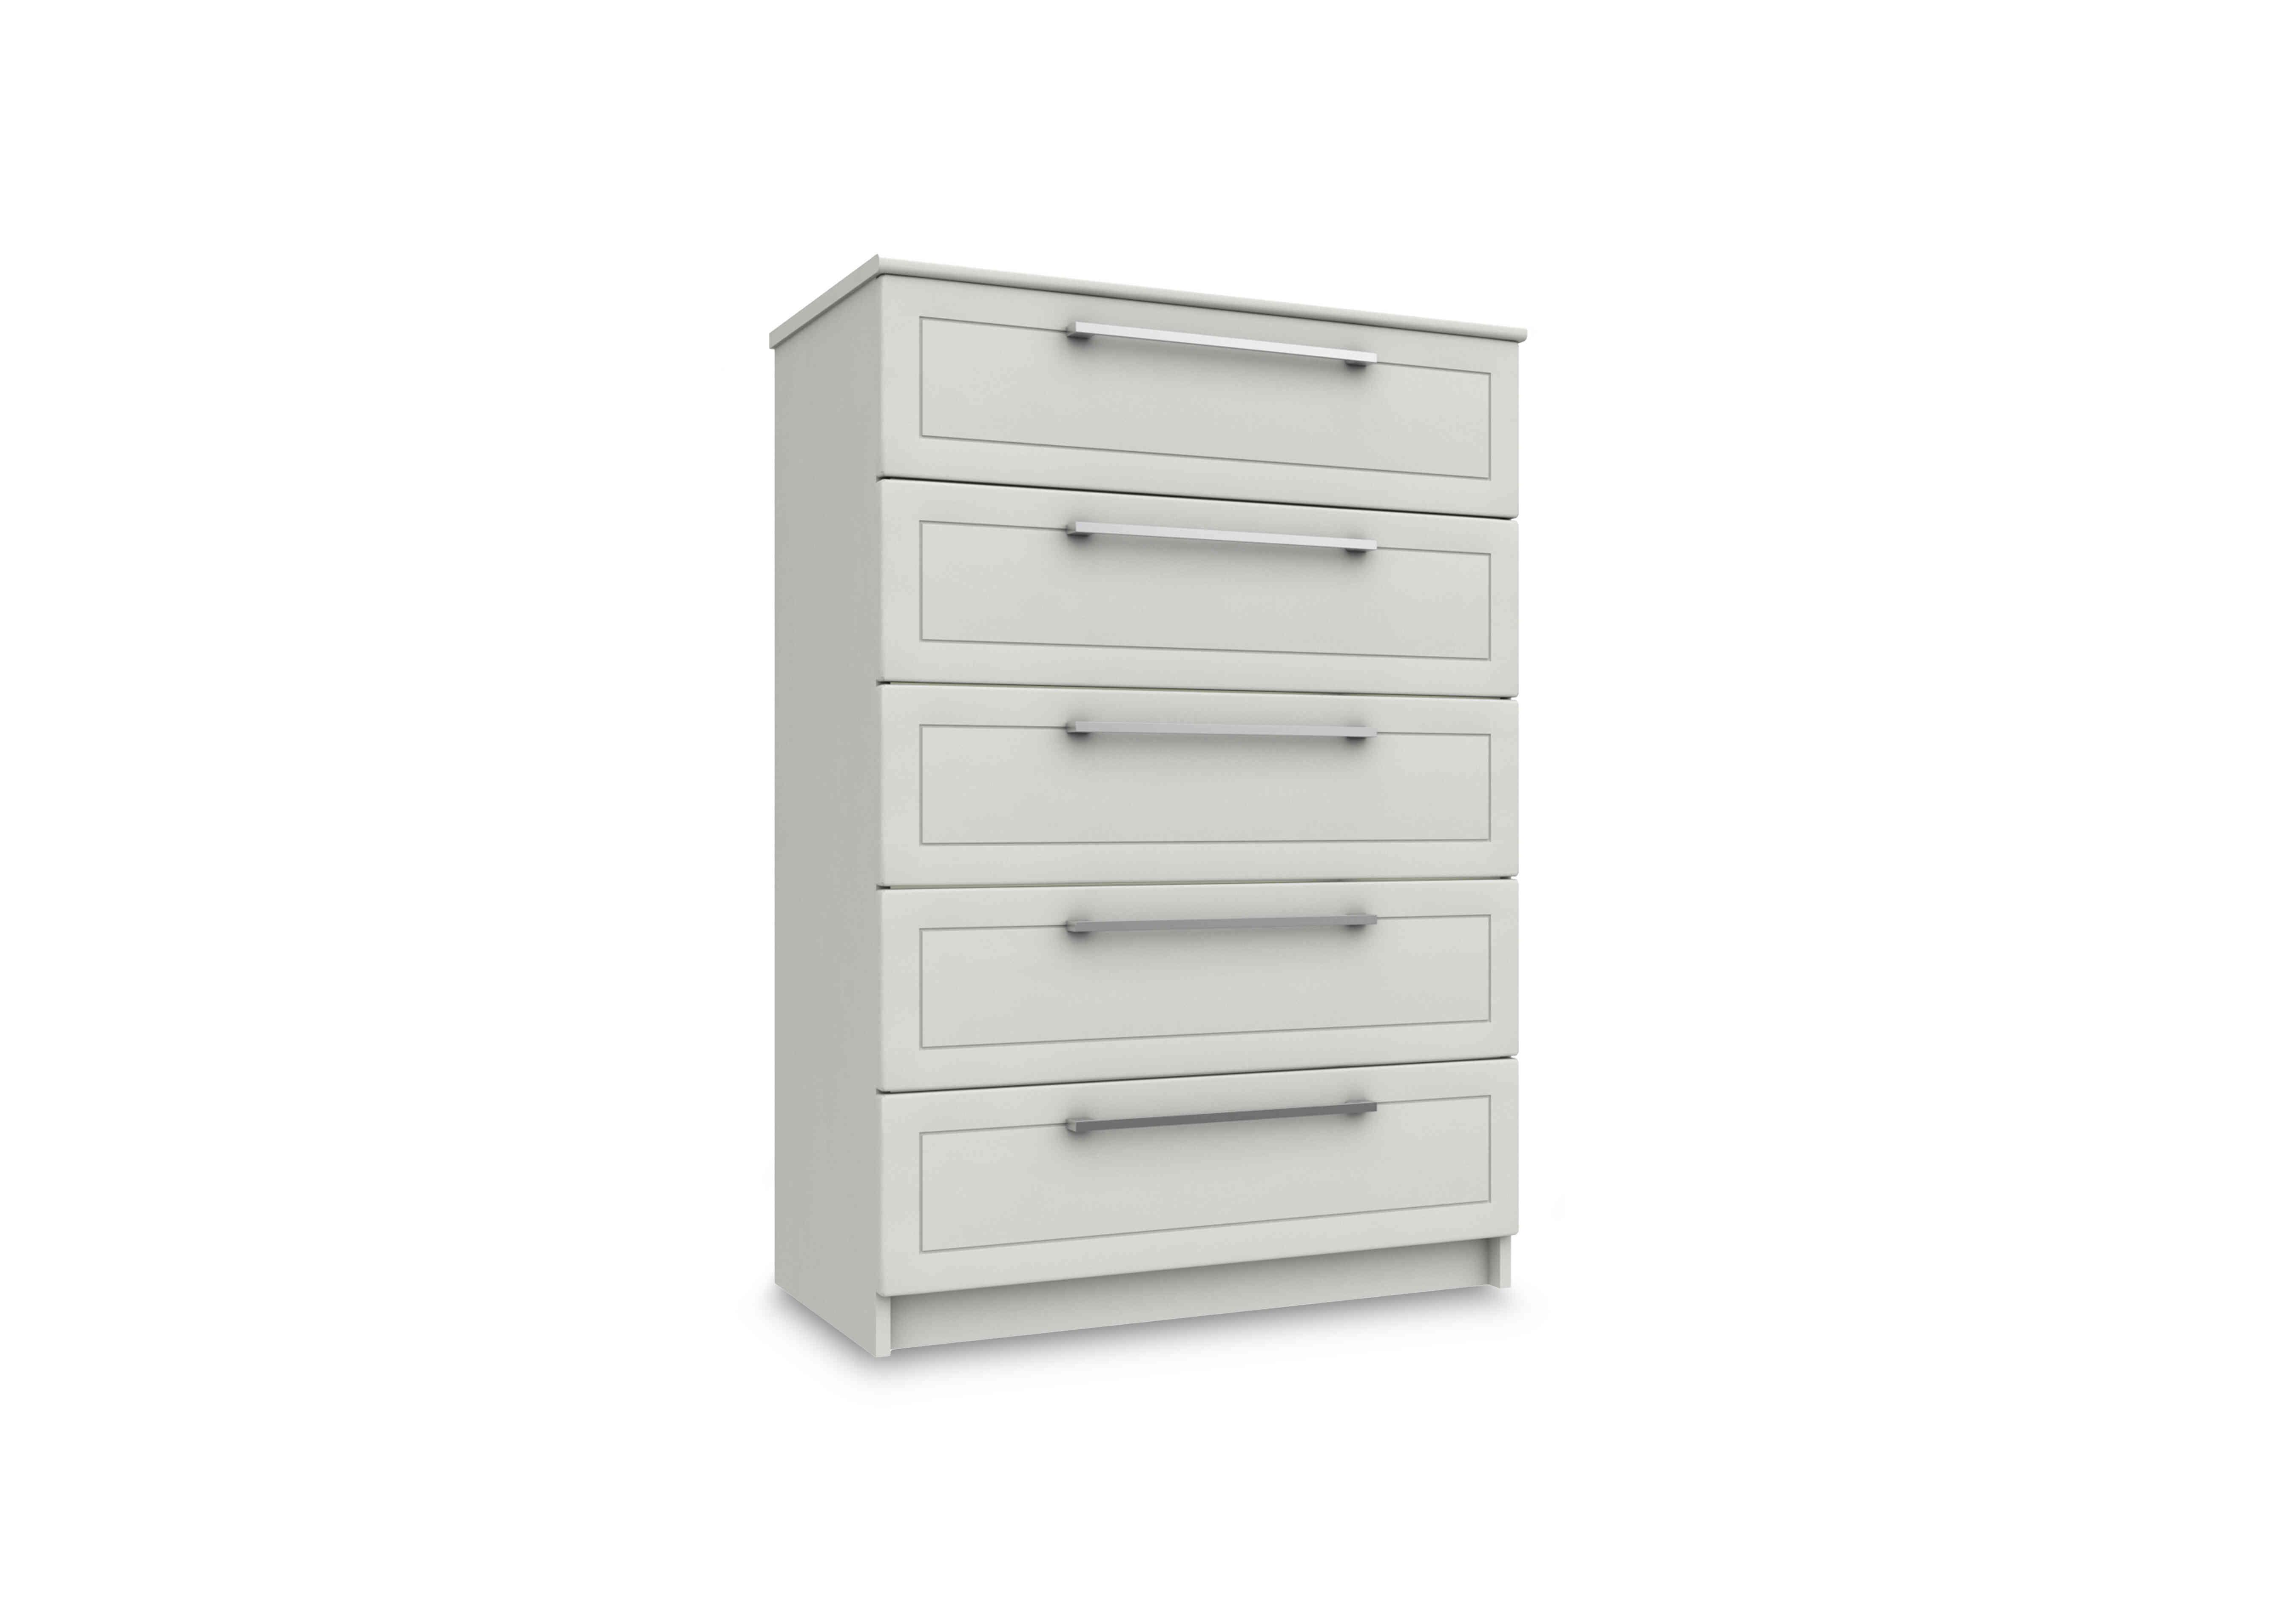 Bexley 5 Drawer Chest in White Gloss on Furniture Village